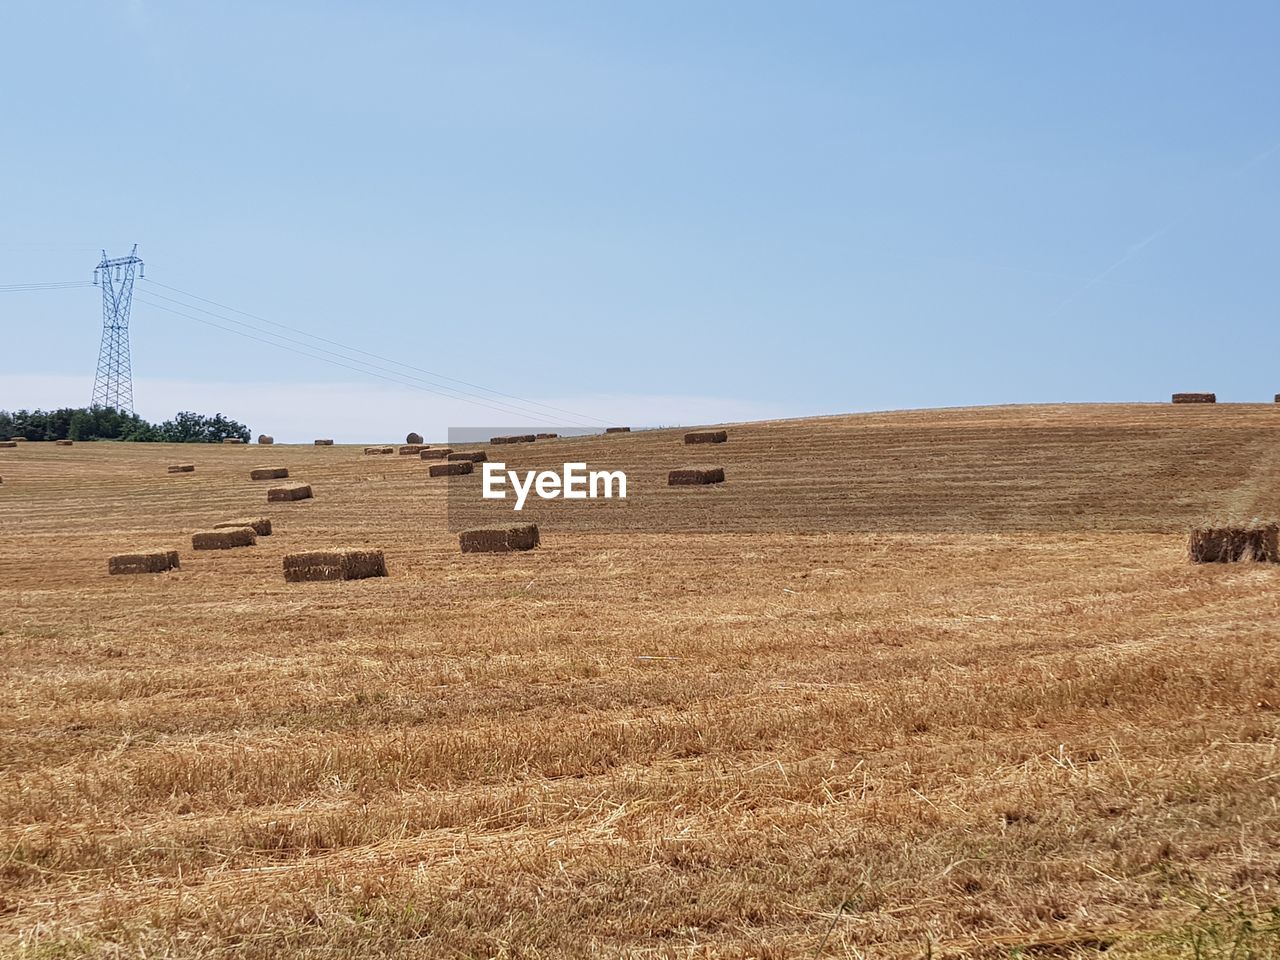 VIEW OF HAY BALES ON FIELD AGAINST CLEAR SKY